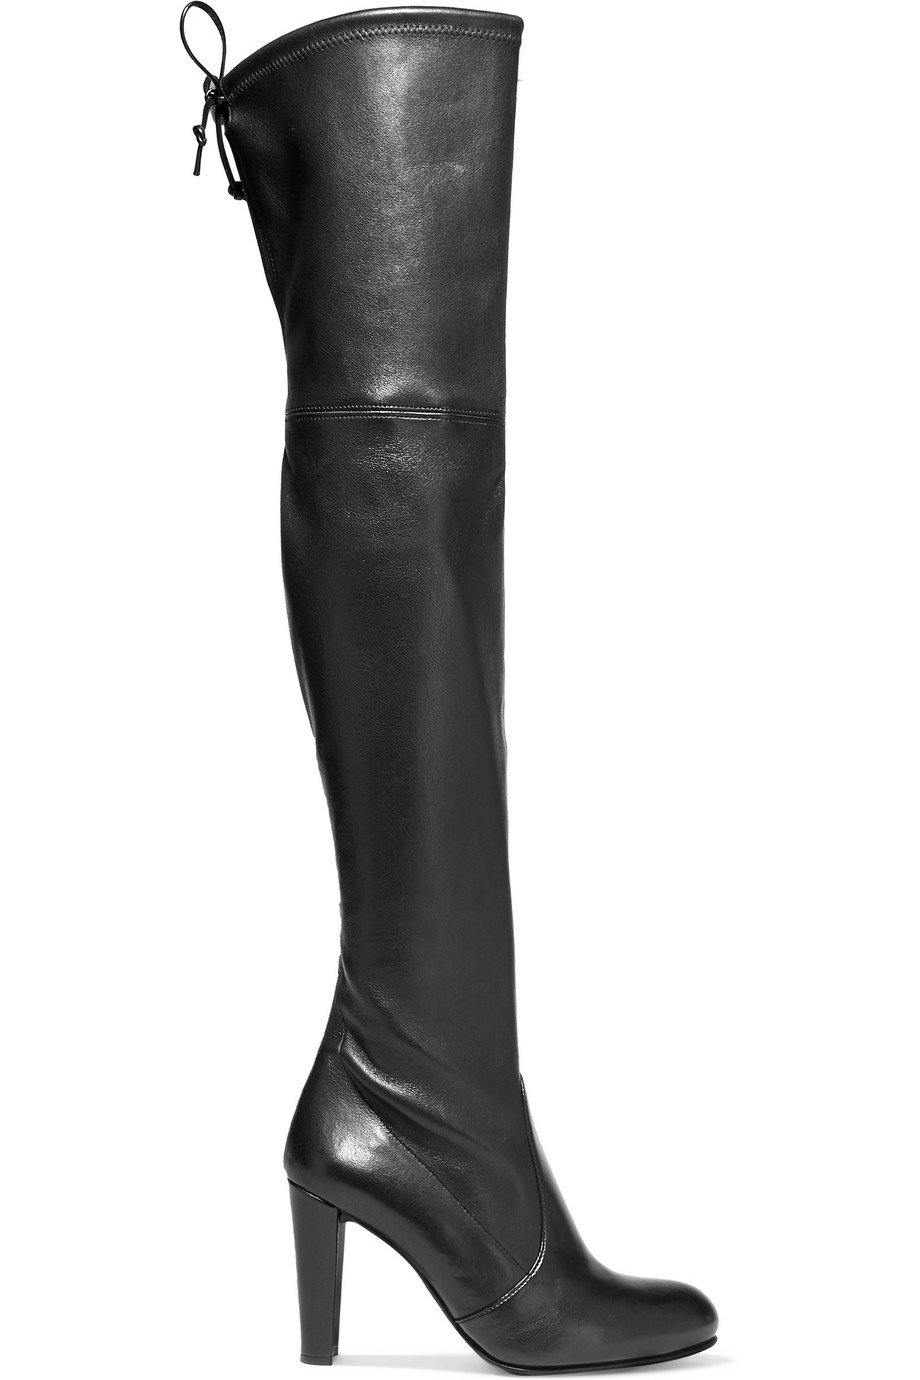 Stuart weitzman Highland Leather Over-the-knee Boots in Black | Lyst